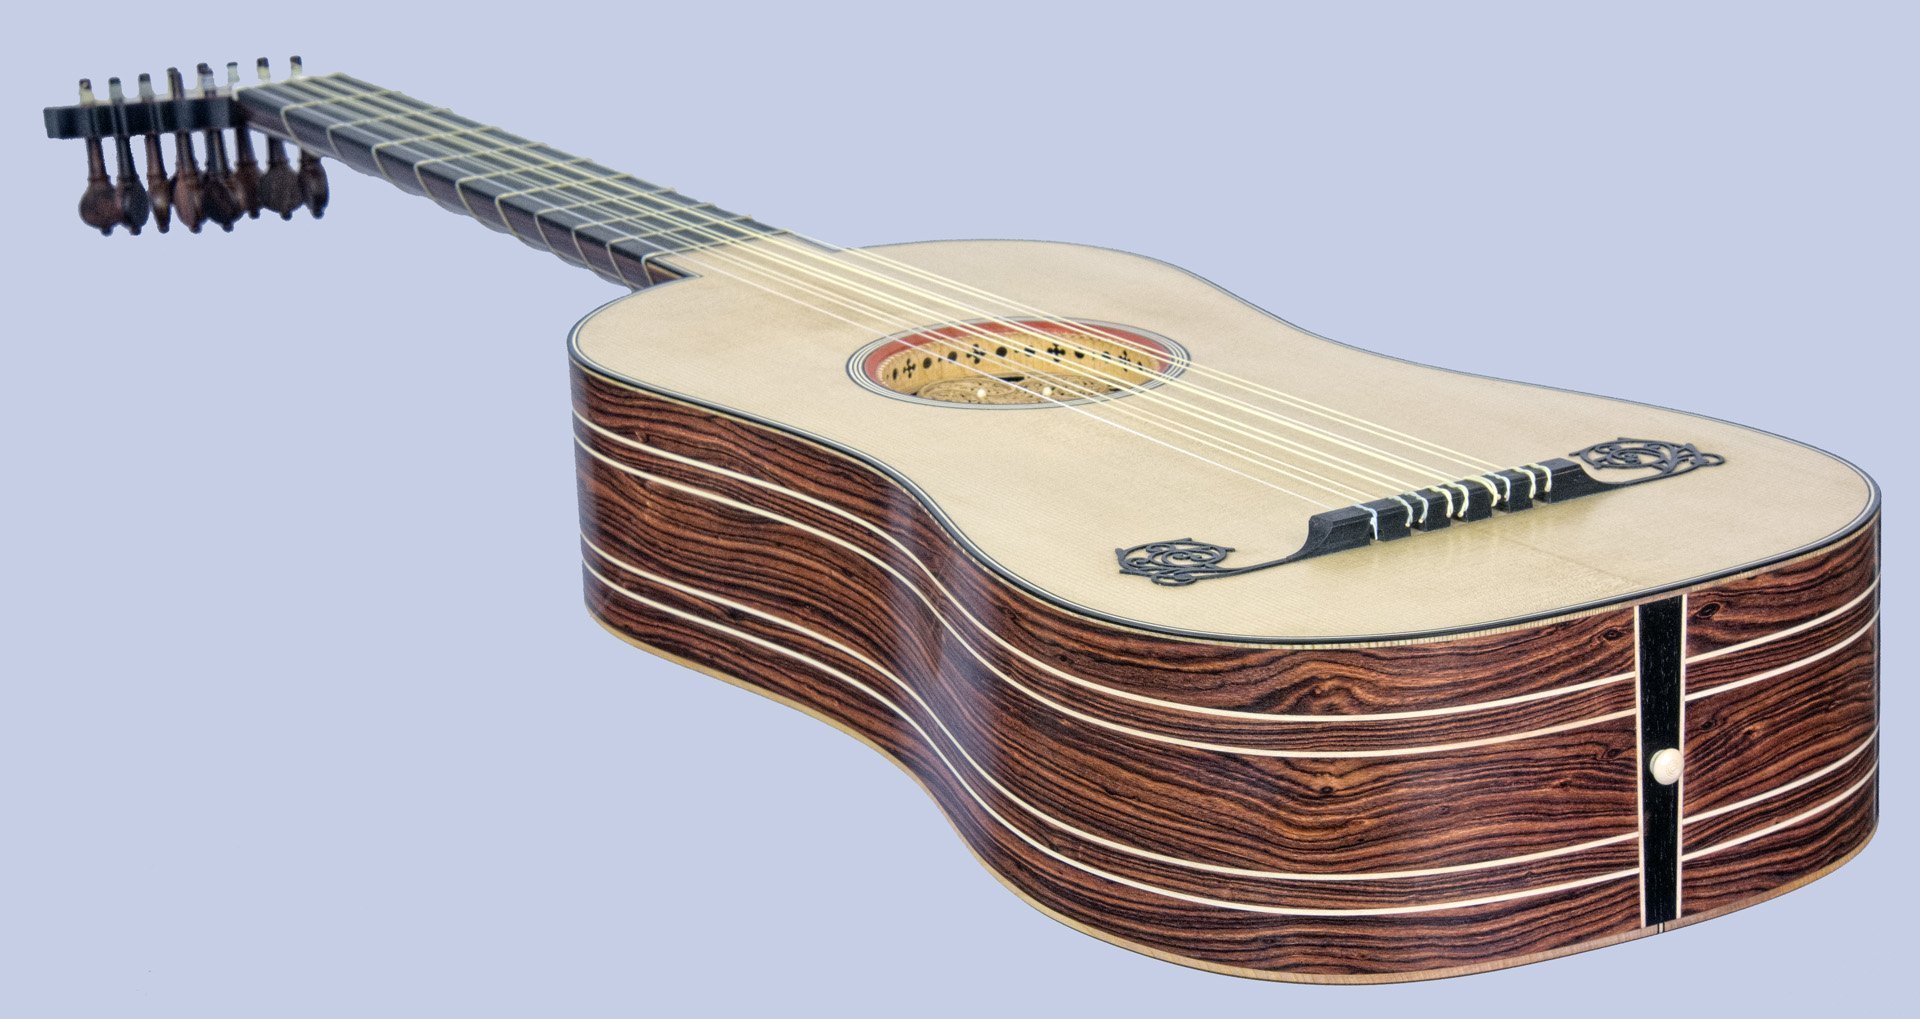 5-course baroque guitar with kingwood sides: end view in perspective